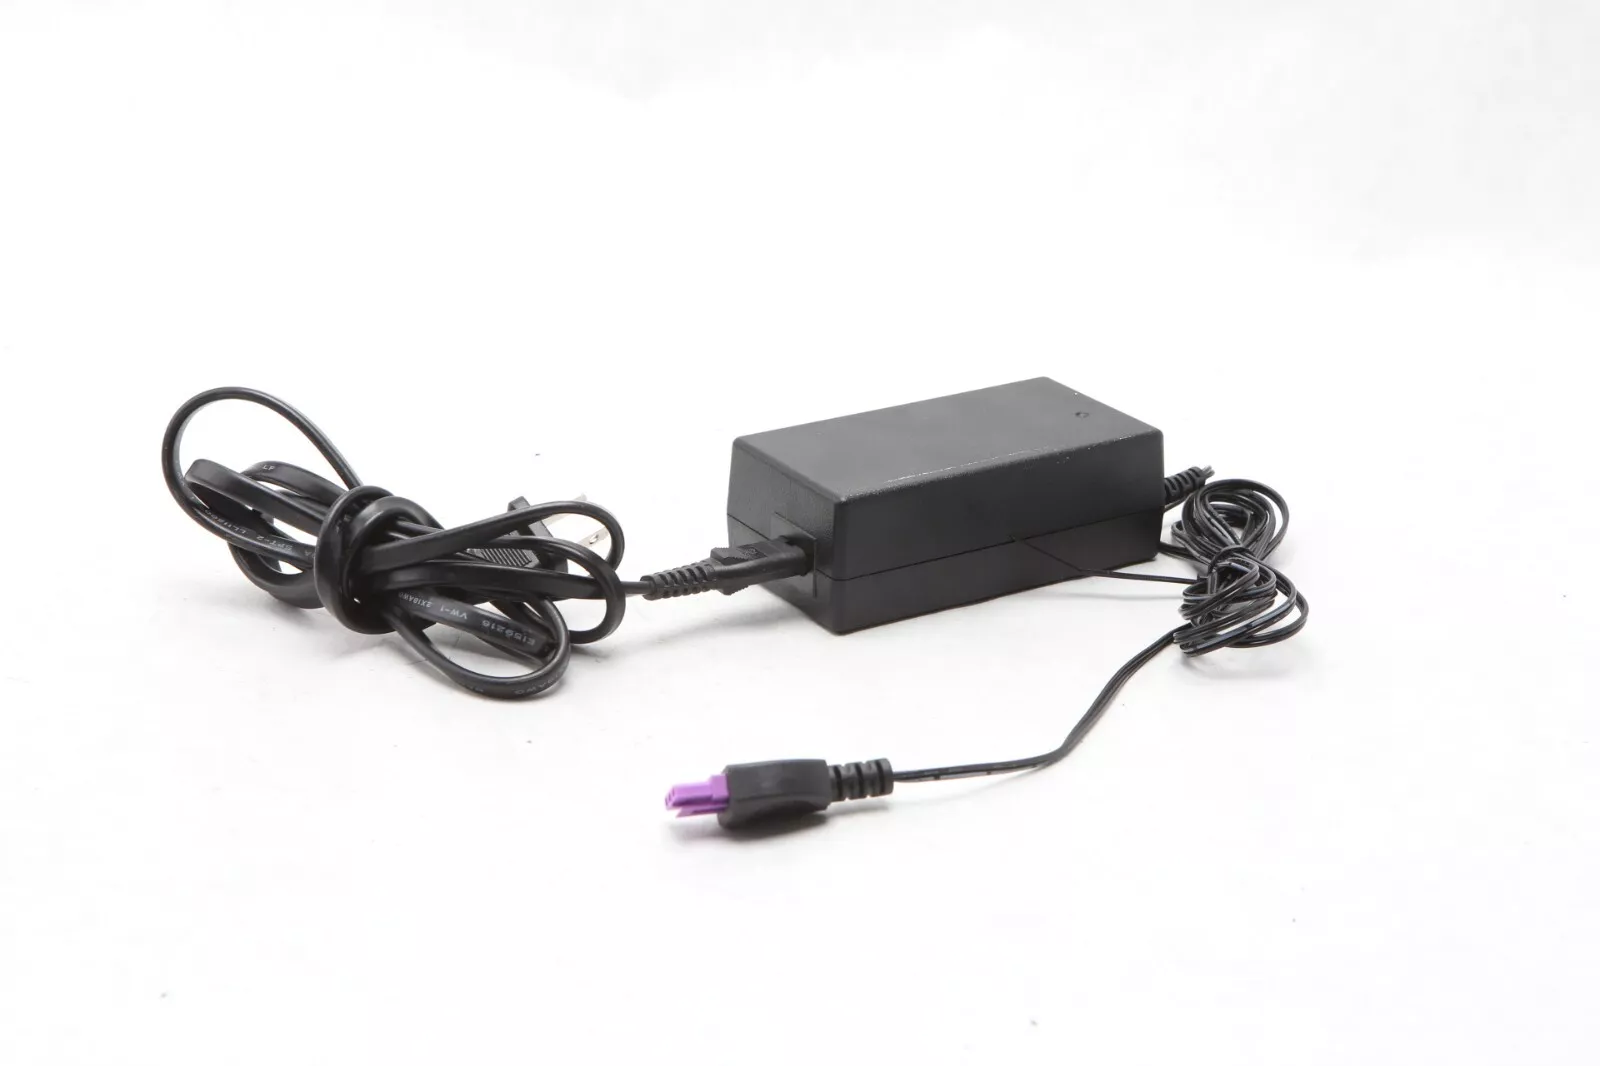 HP Genuine AC Adapter 32V 1560mA 0957-2230 0957-2105 0957-2105 for HP Off... - $14.95